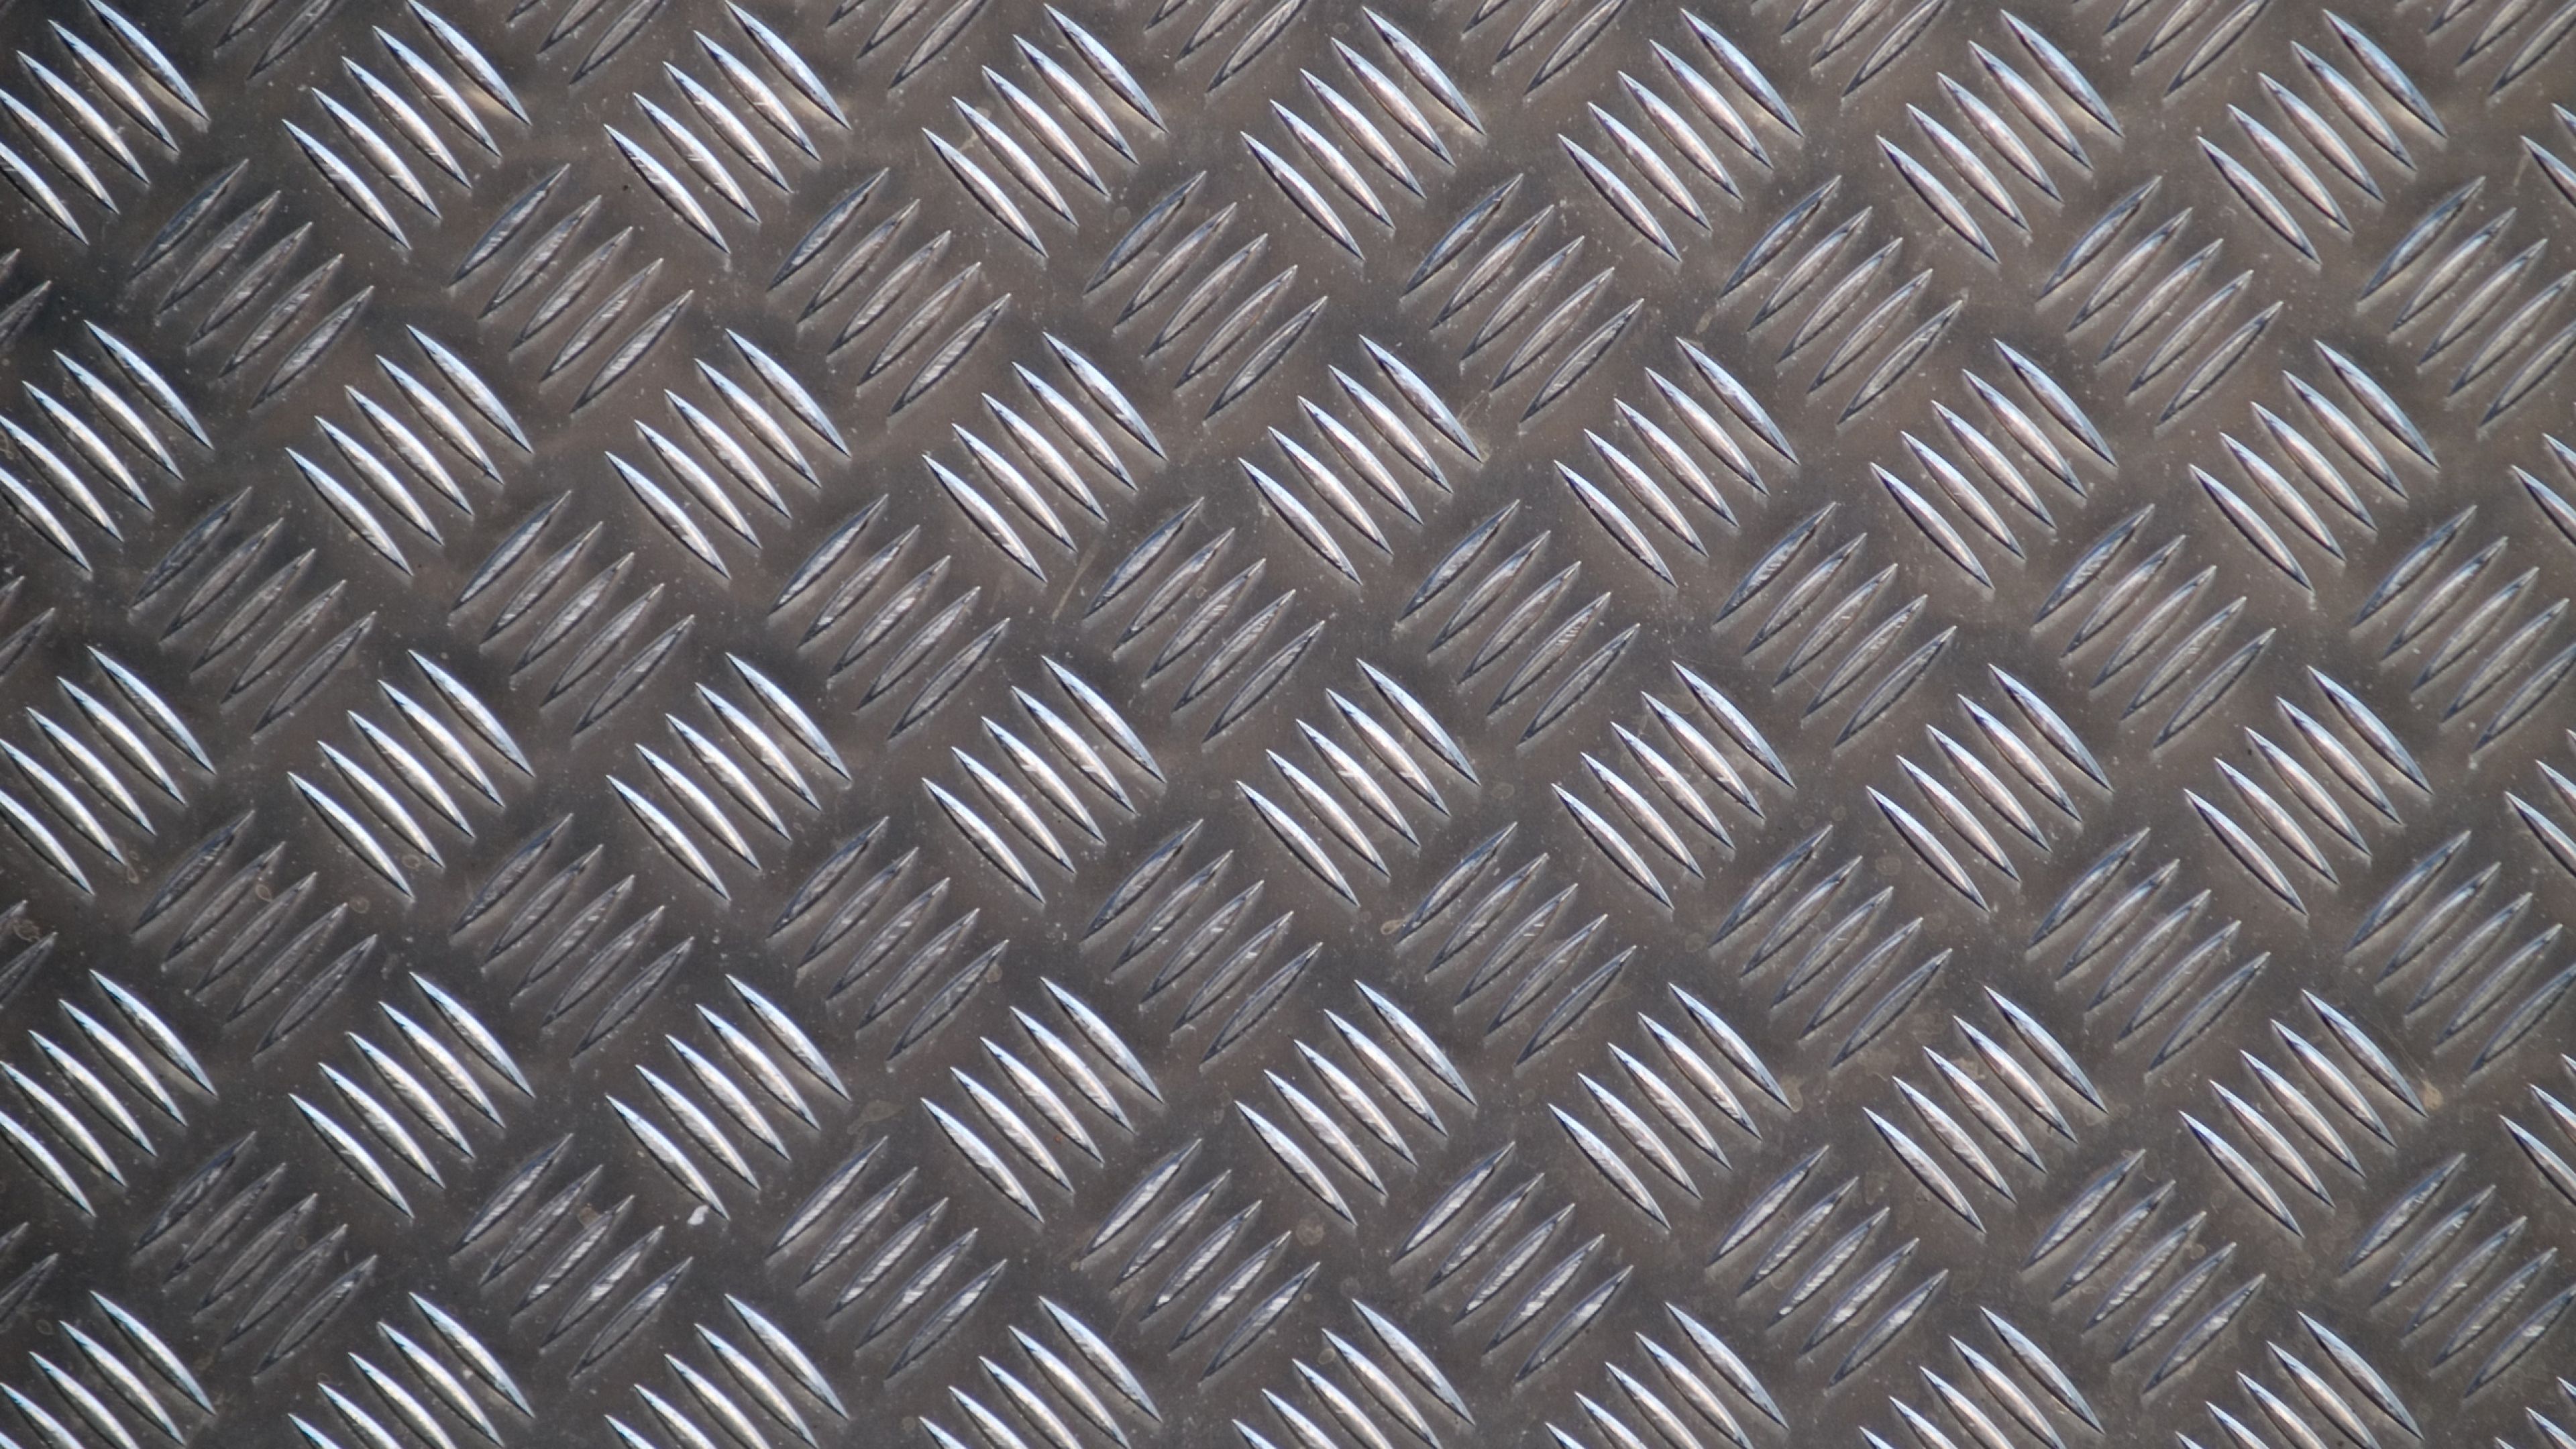 Brown Woven Textile on Brown Wooden Floor. Wallpaper in 3840x2160 Resolution